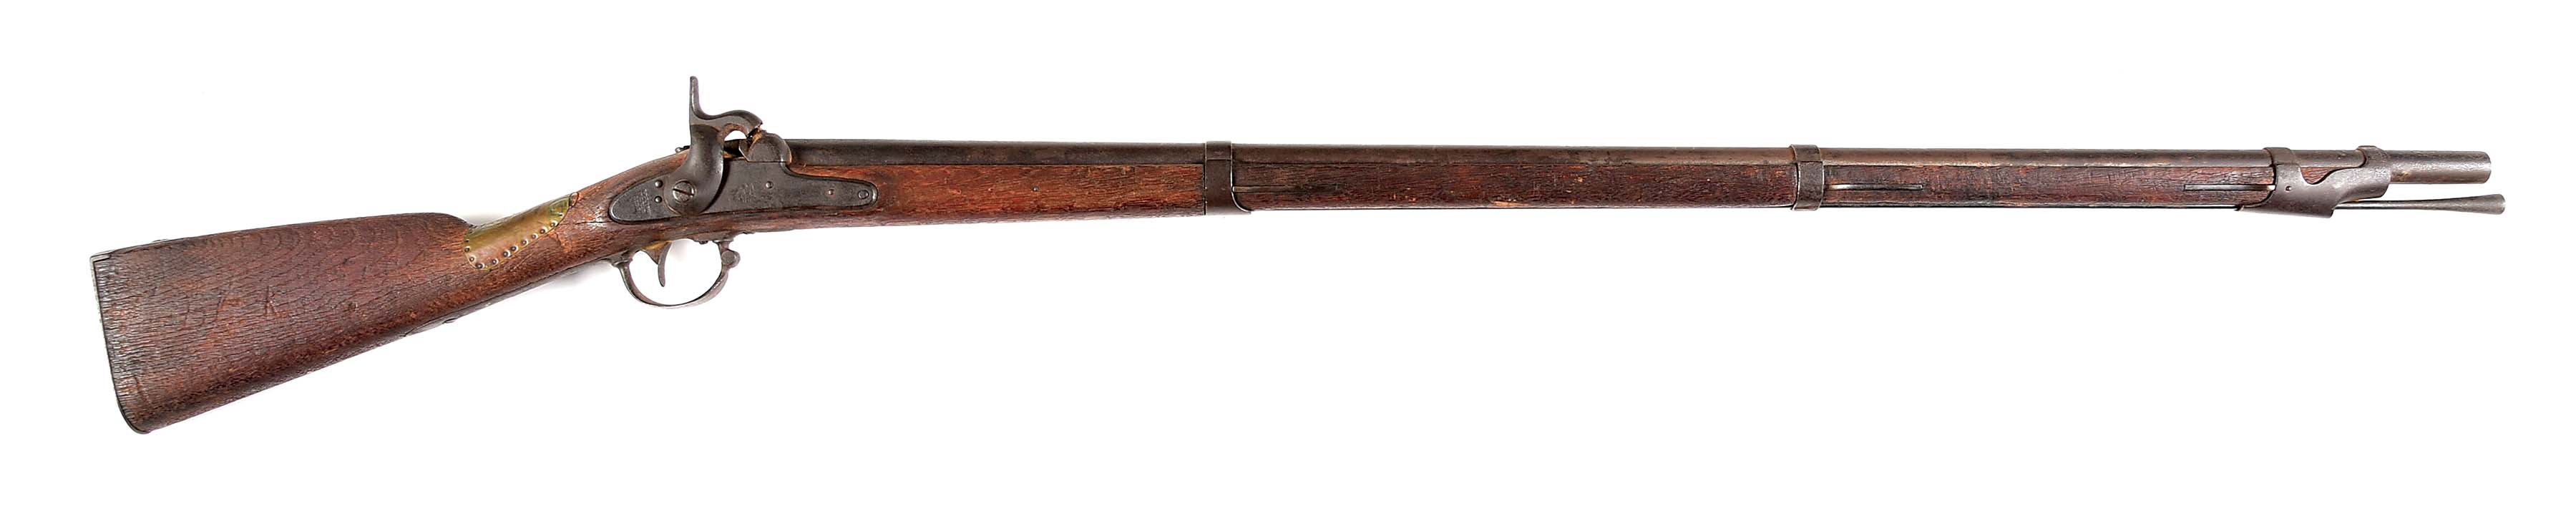 A) model 1842 springfield percussion musket from battle of south mountain. 